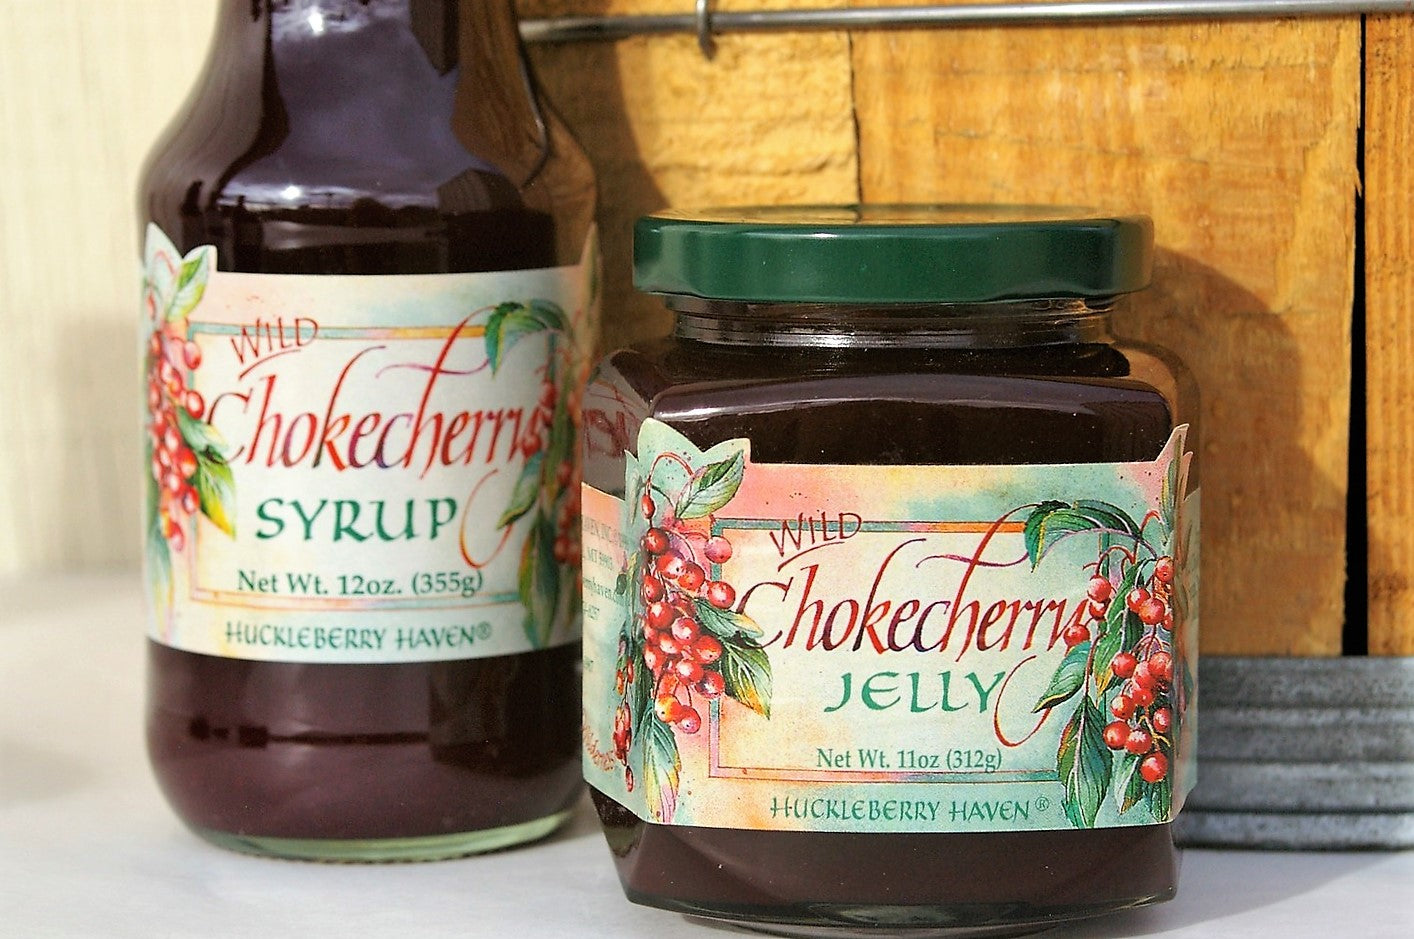 Wild chokecherry jelly and syrup combo.  Made in Montana.